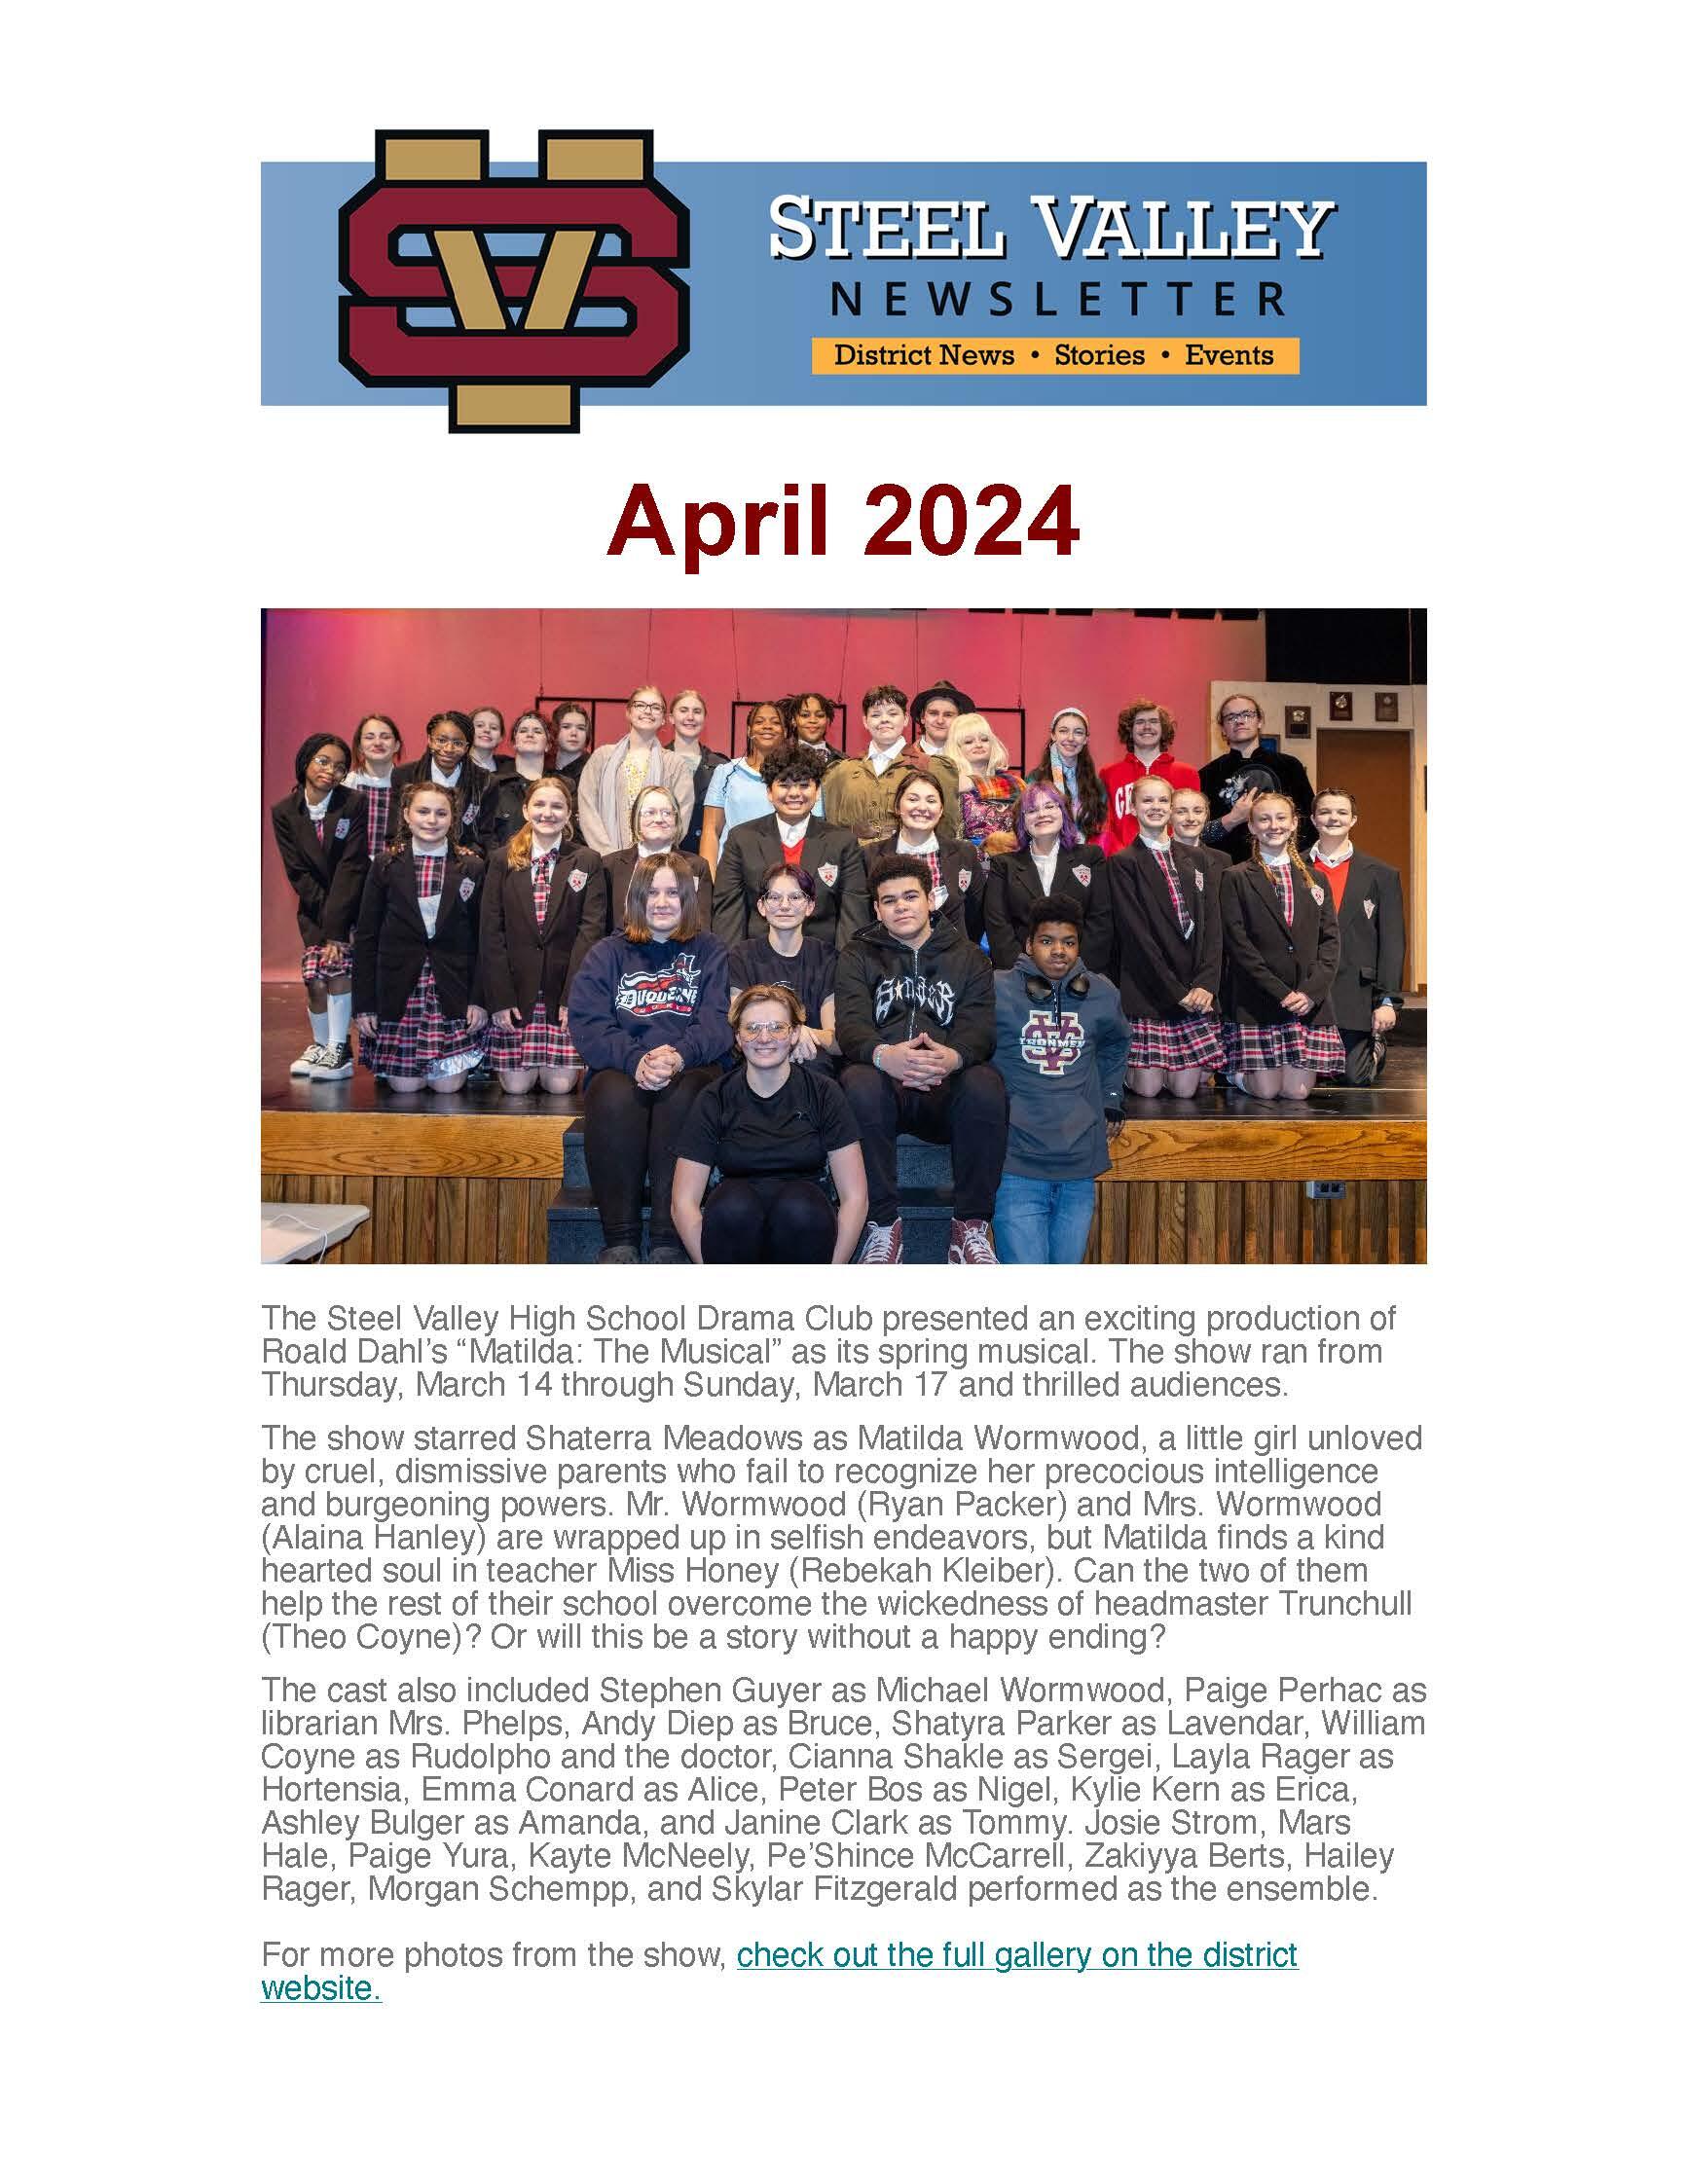 The first page of the April 2024 newsletter